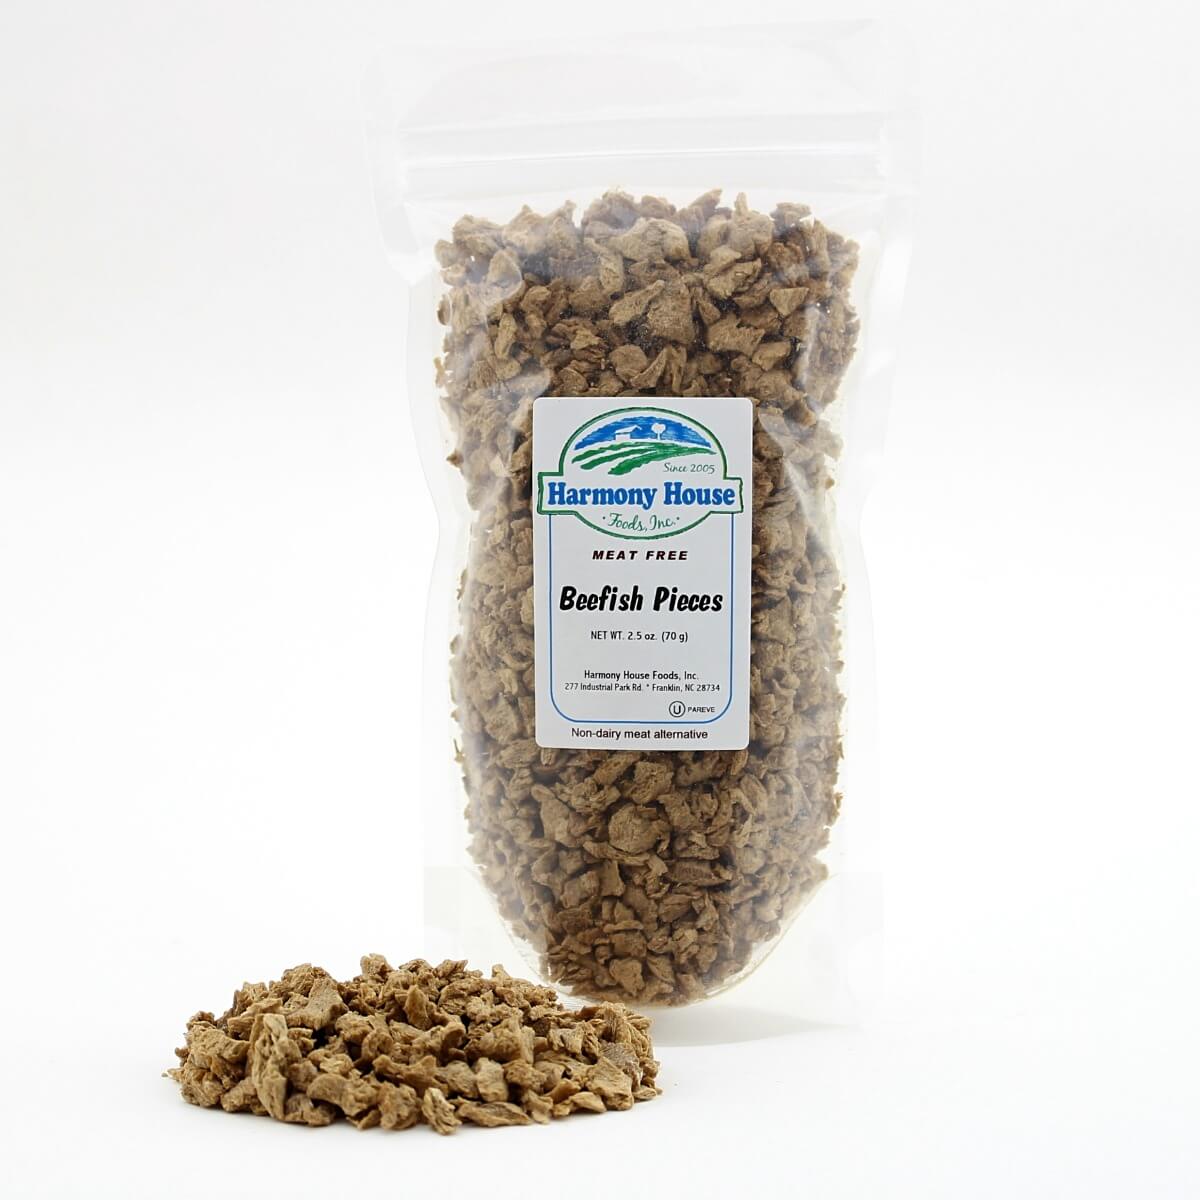 A bag of brown rice granola on a white background.